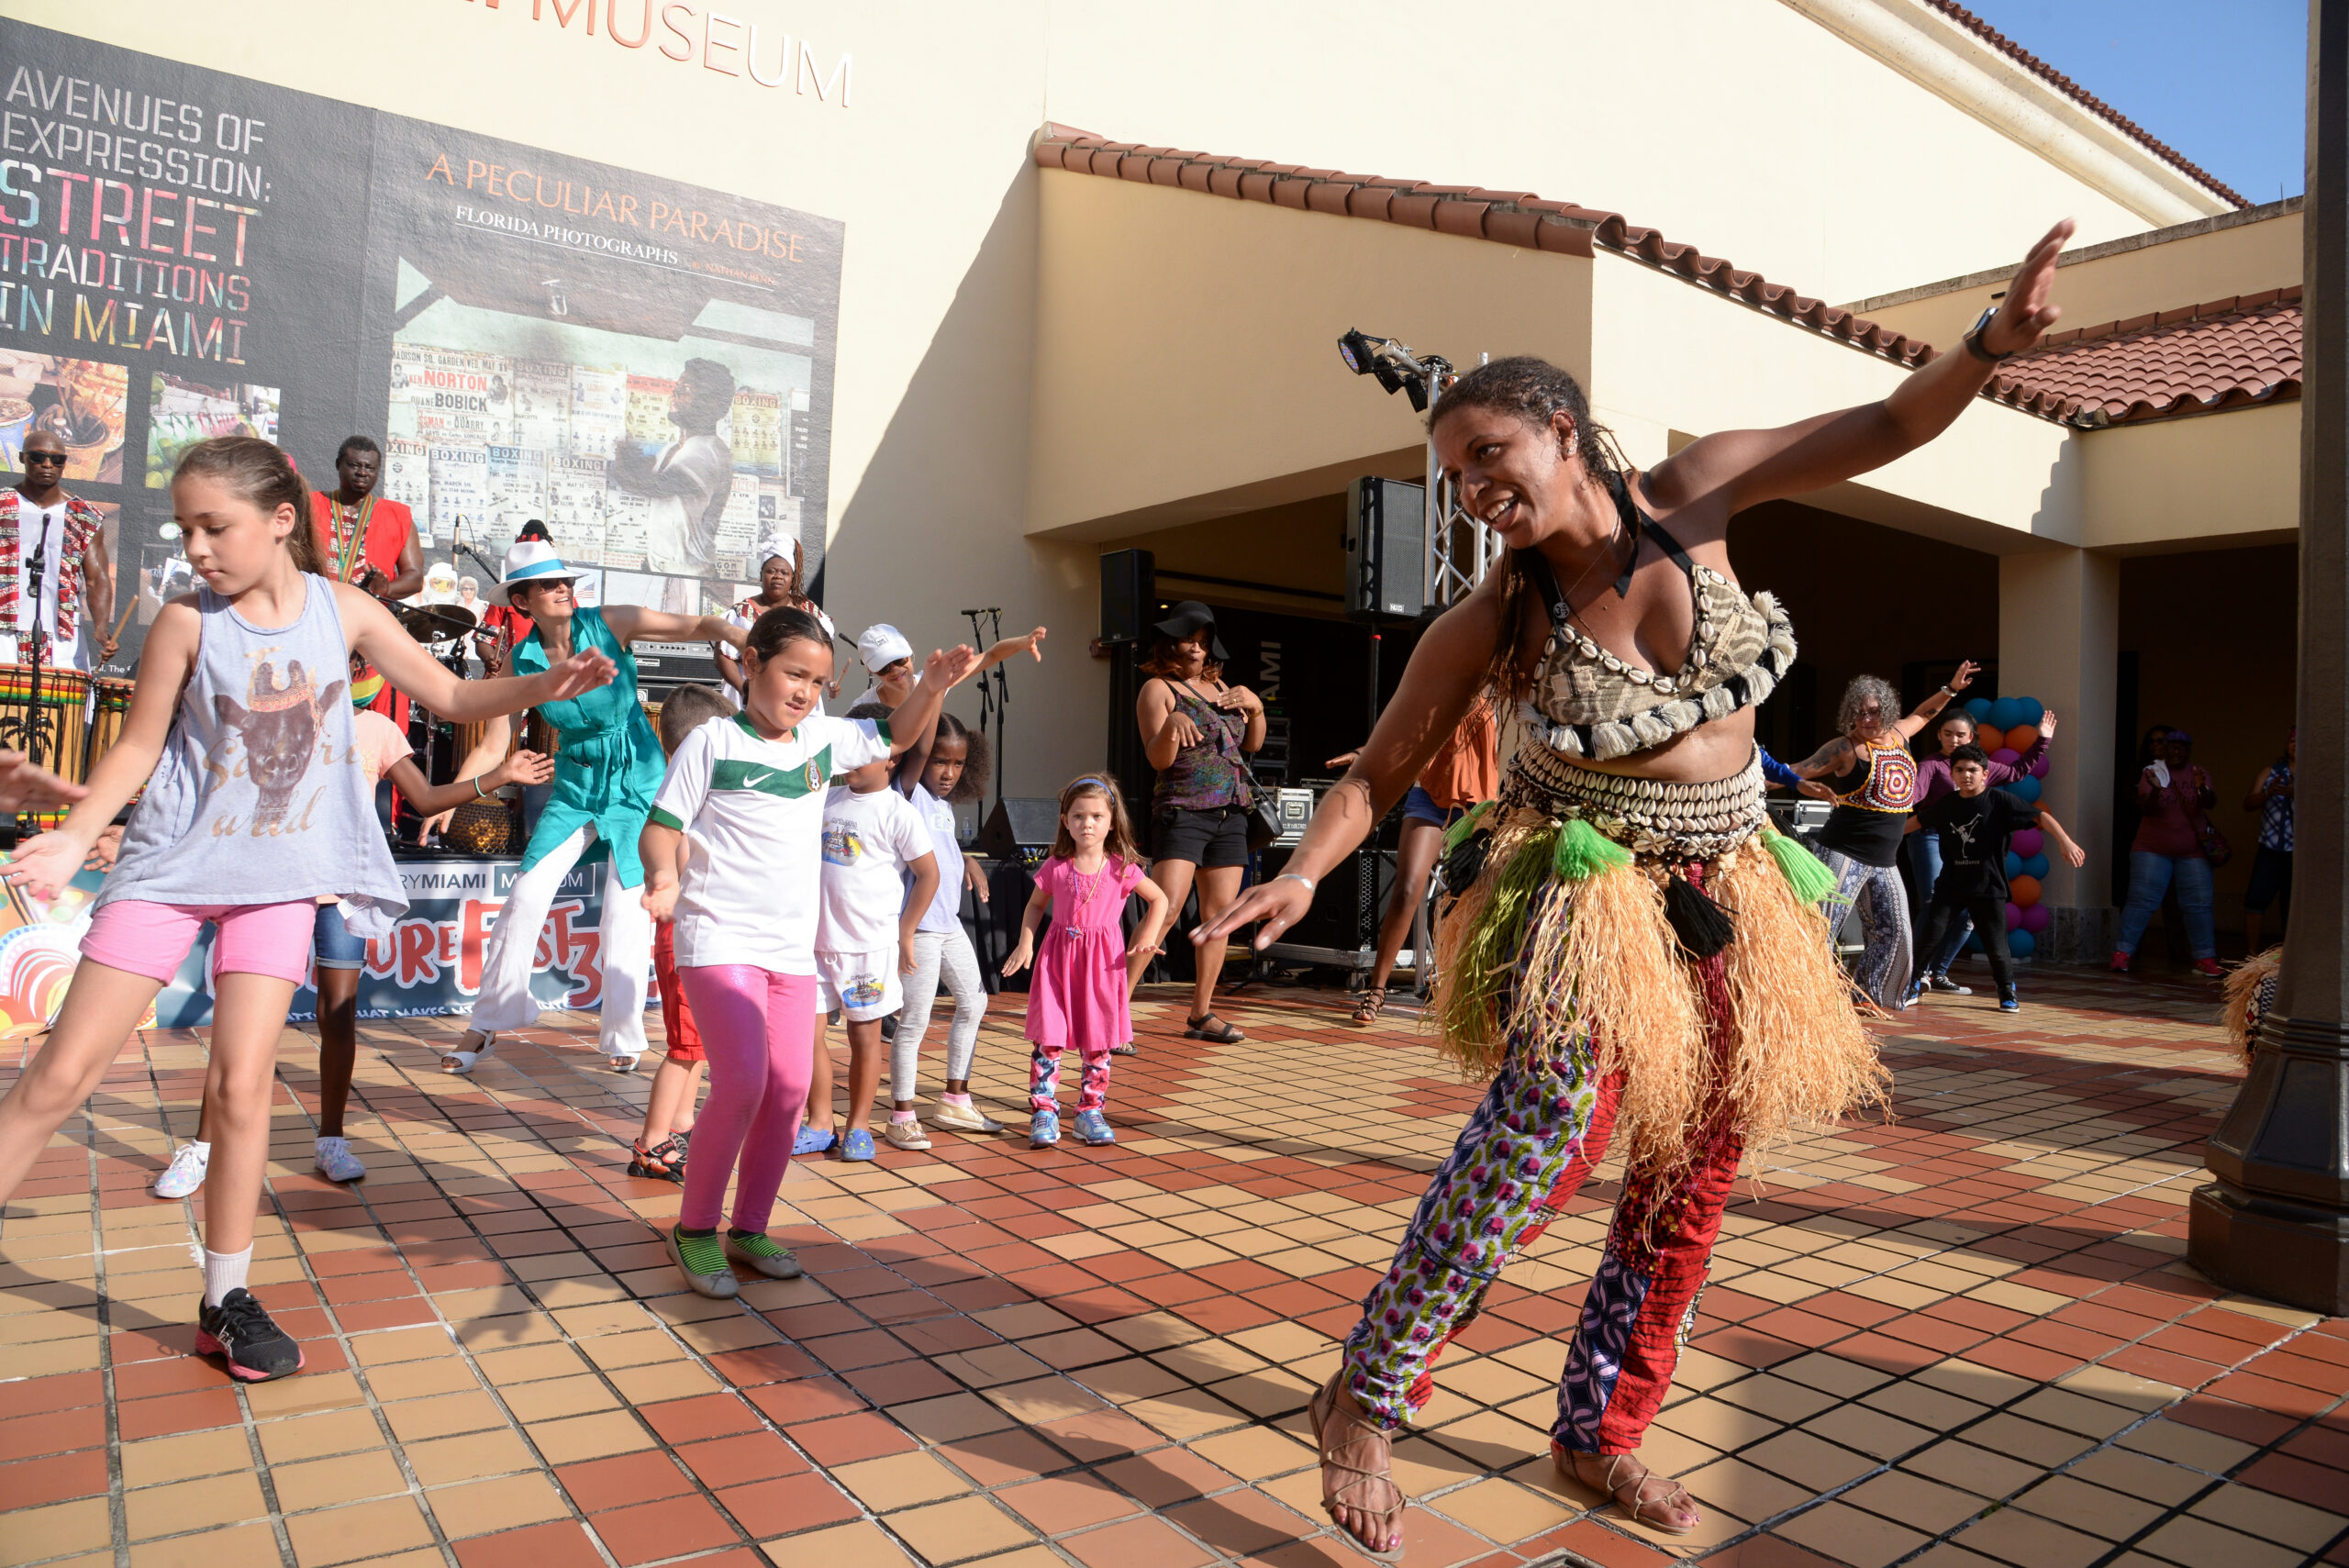 A dancer from the Delou Africa ensemble leads a workshop with a group of children who are dancing along